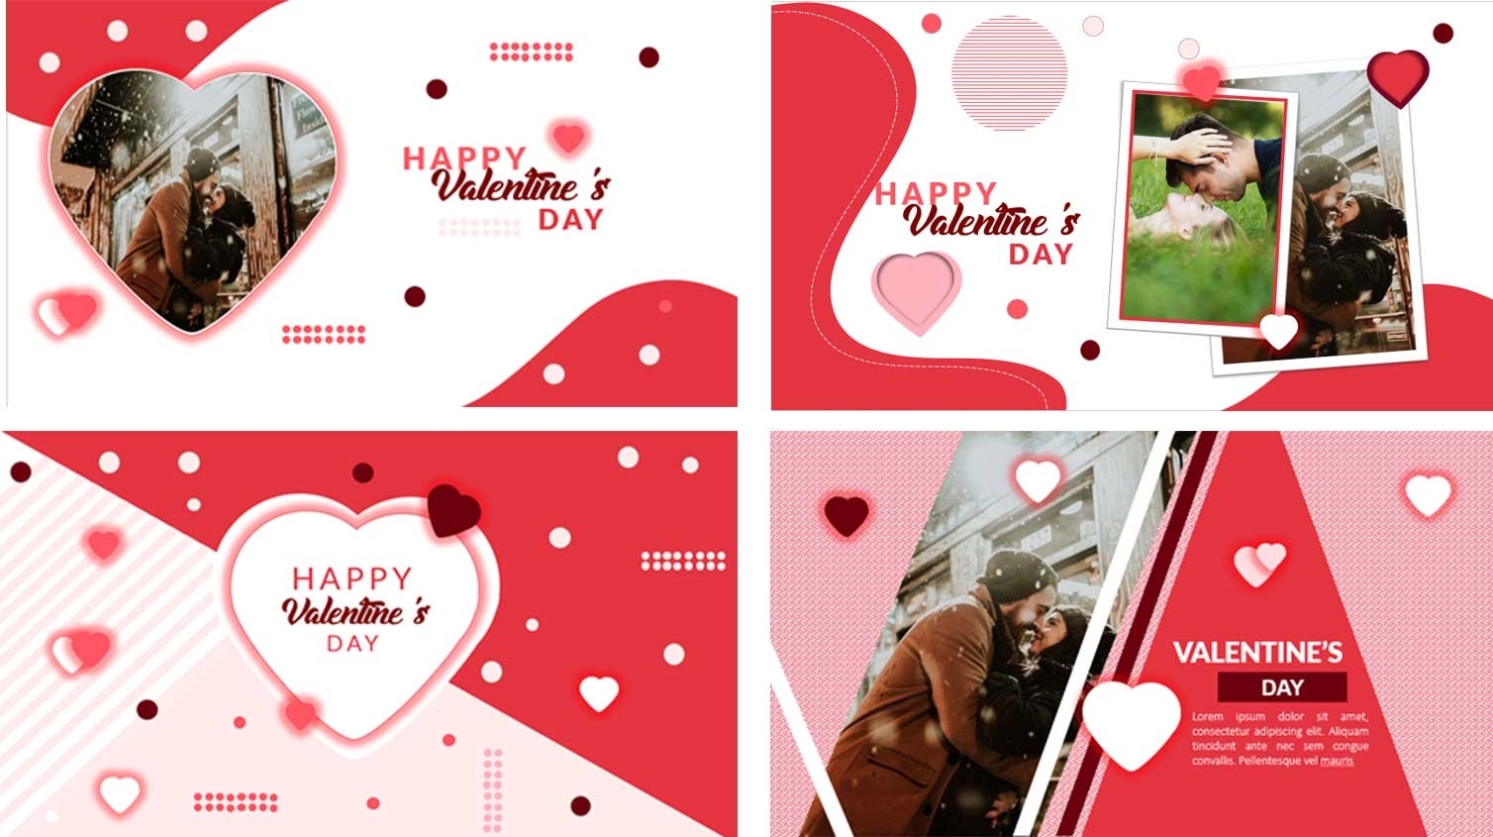 Free | Creative Valentine'S Card Design In Powerpoint Templates 2021 Pertaining To Valentine Powerpoint Templates Free